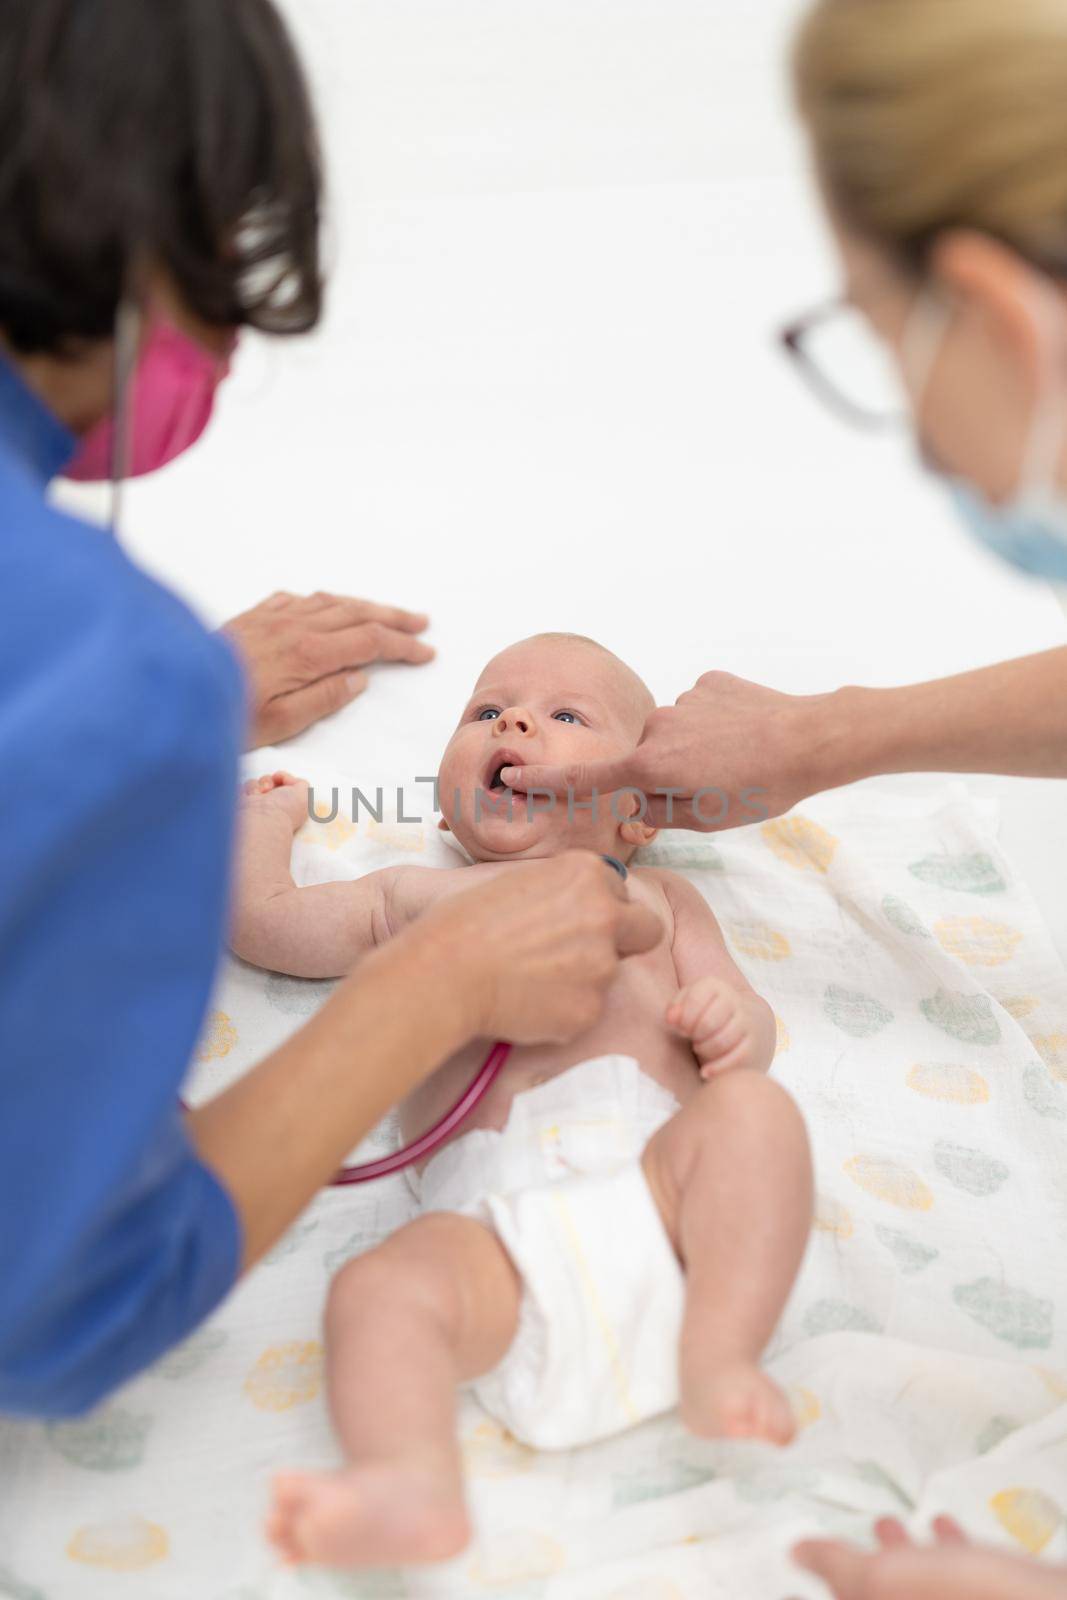 Baby lying on his back as his doctor examines him during a standard medical checkup.